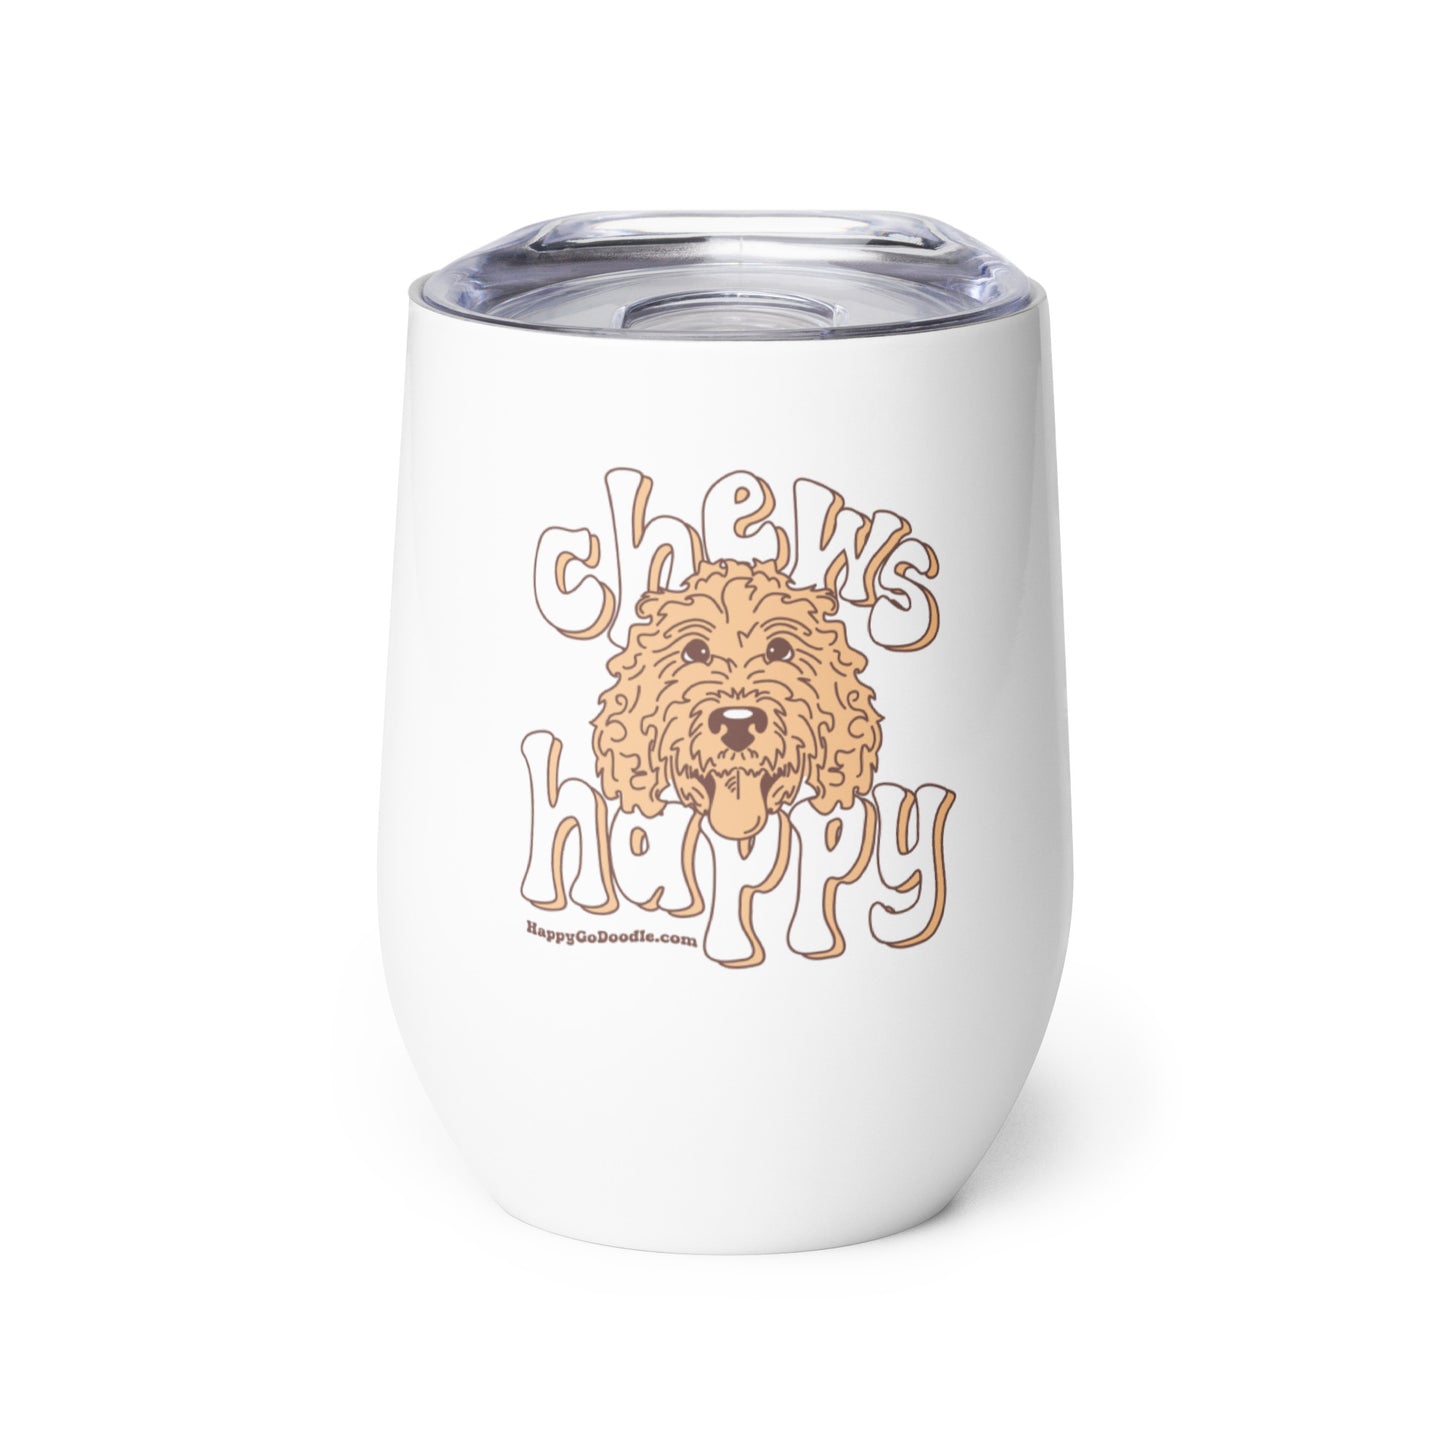 11 oz white wine tumbler with lid and dogs cute face and words chews happy